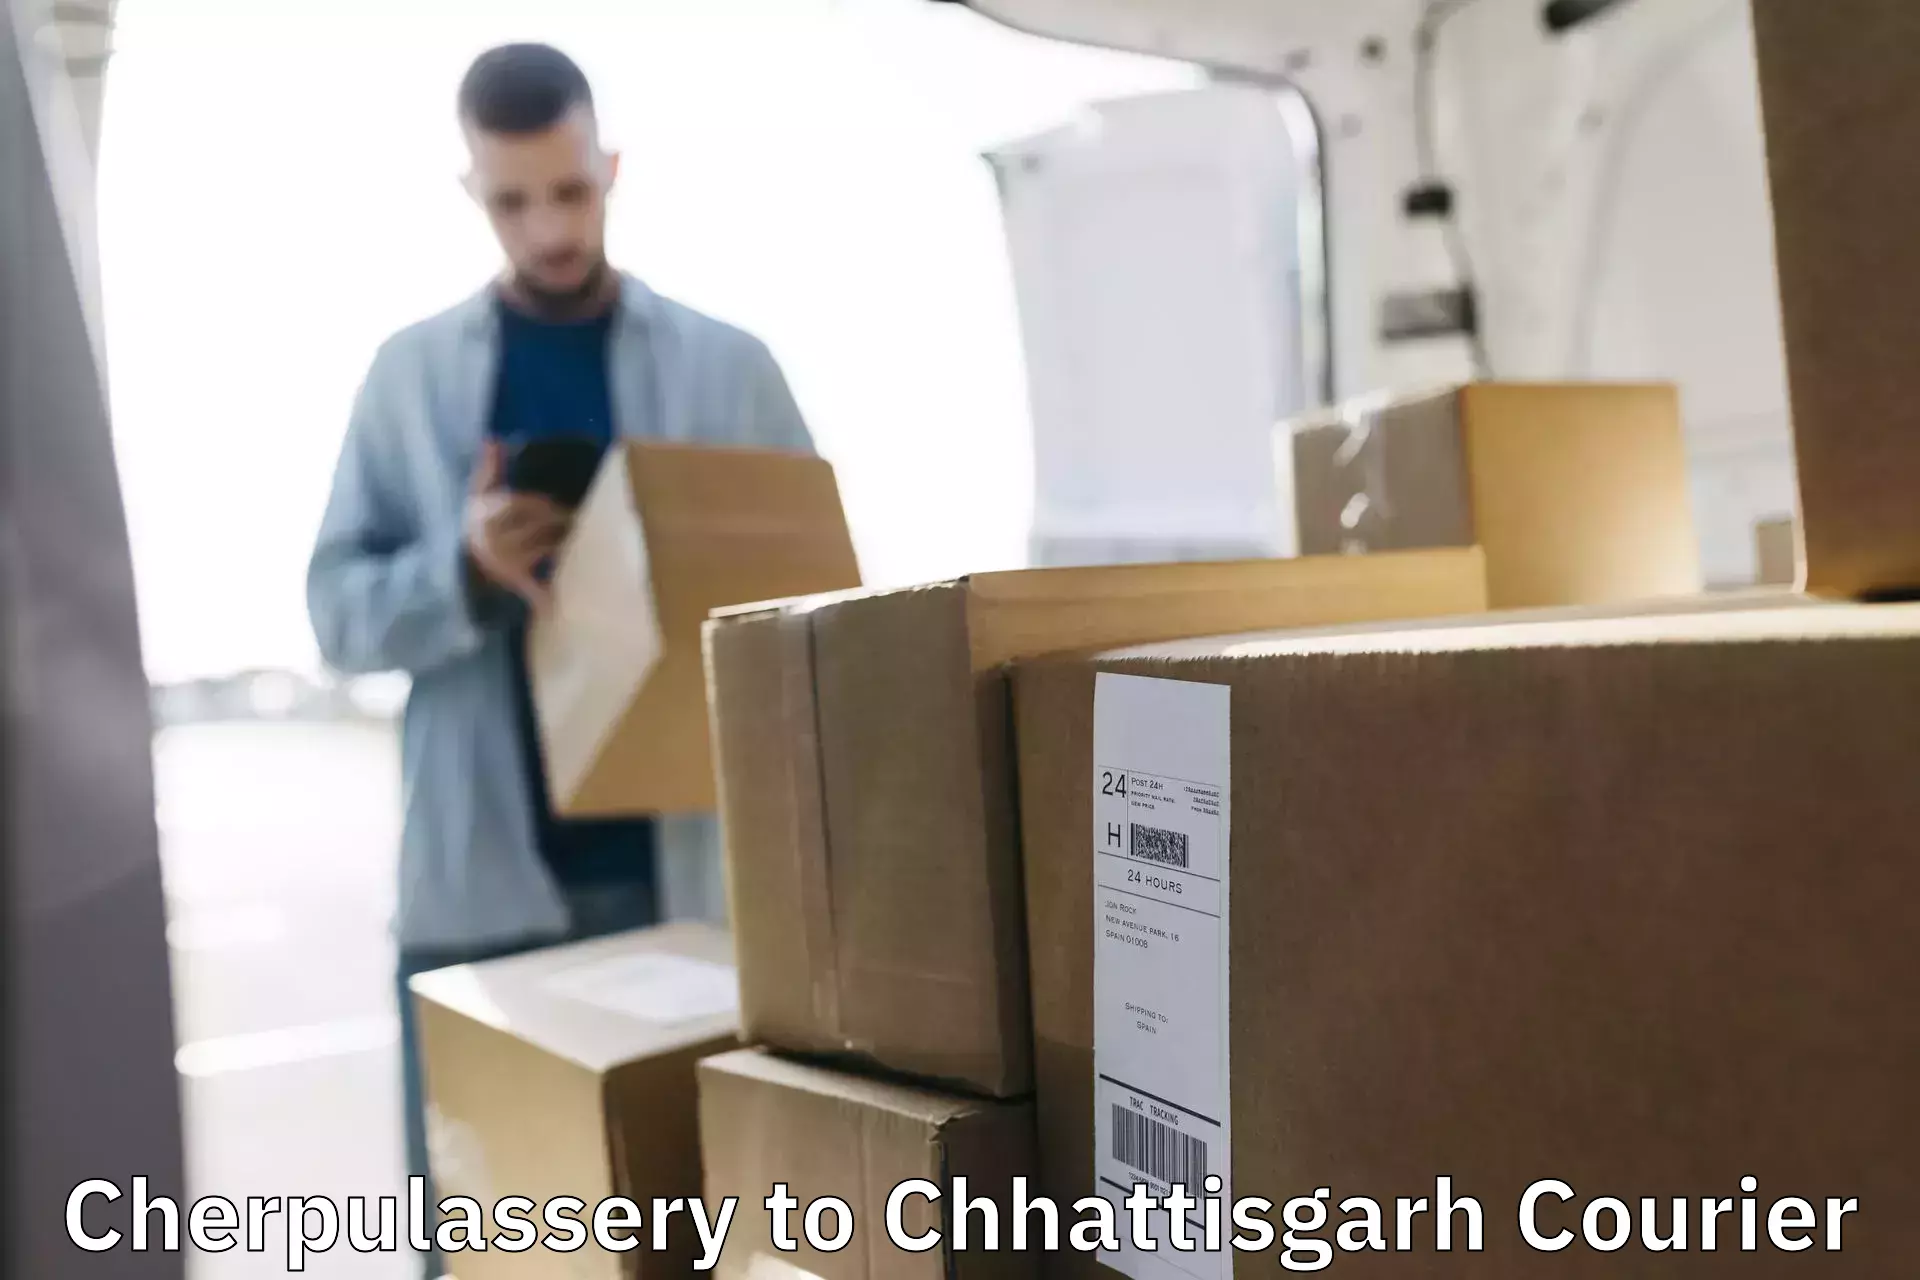 24-hour courier service Cherpulassery to bagbahra